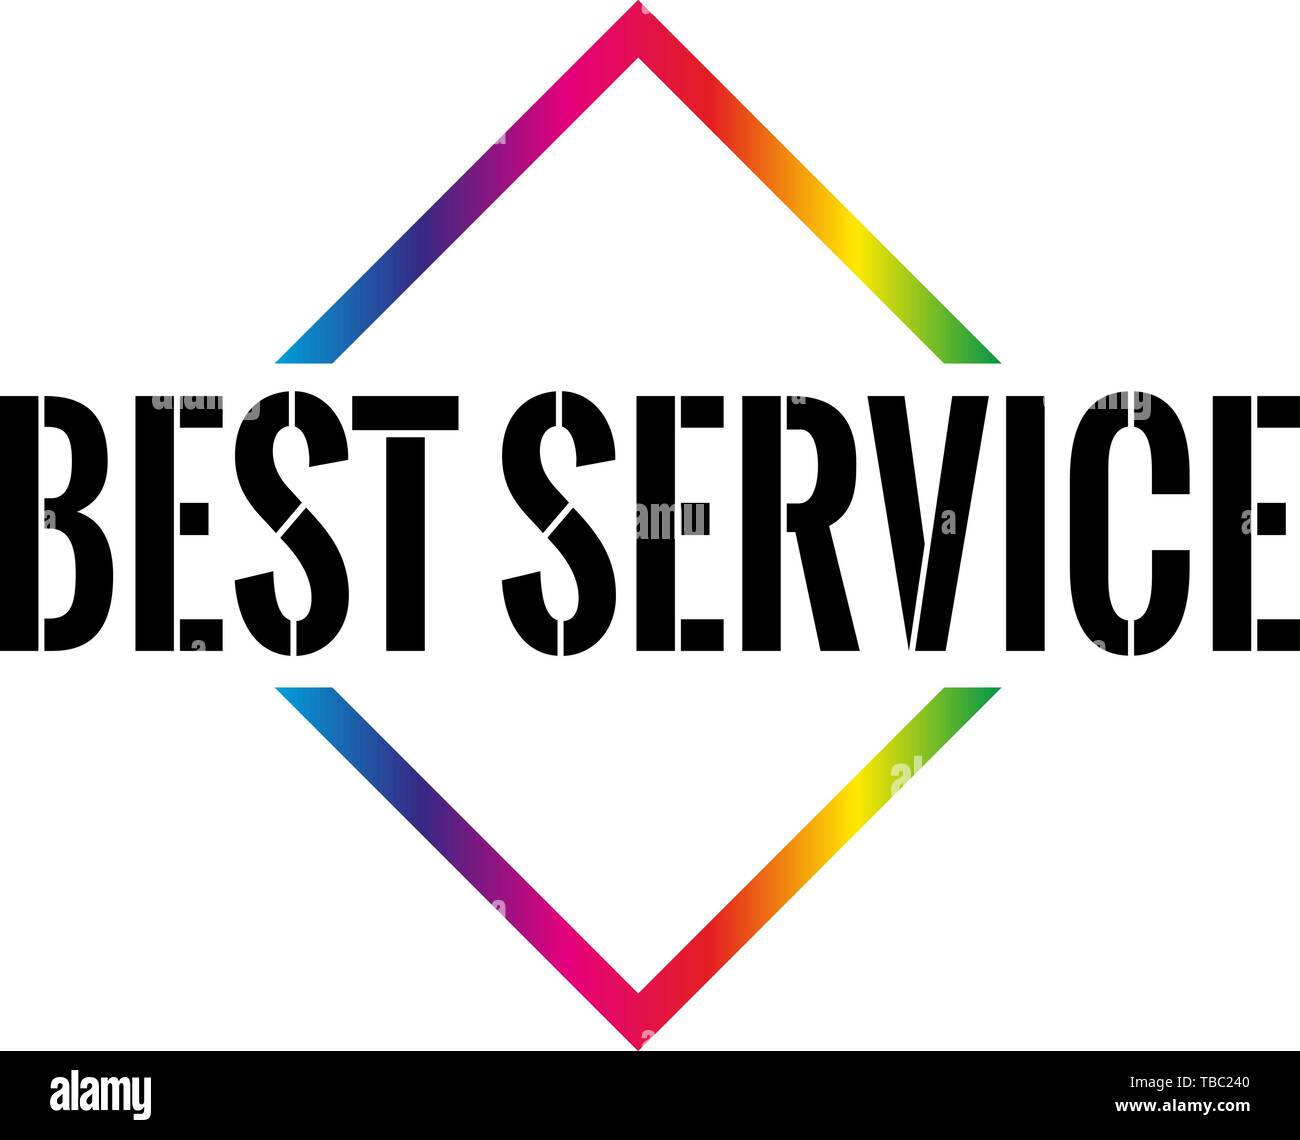 best service Triangle or pyramid line art vector icon Stock Vector